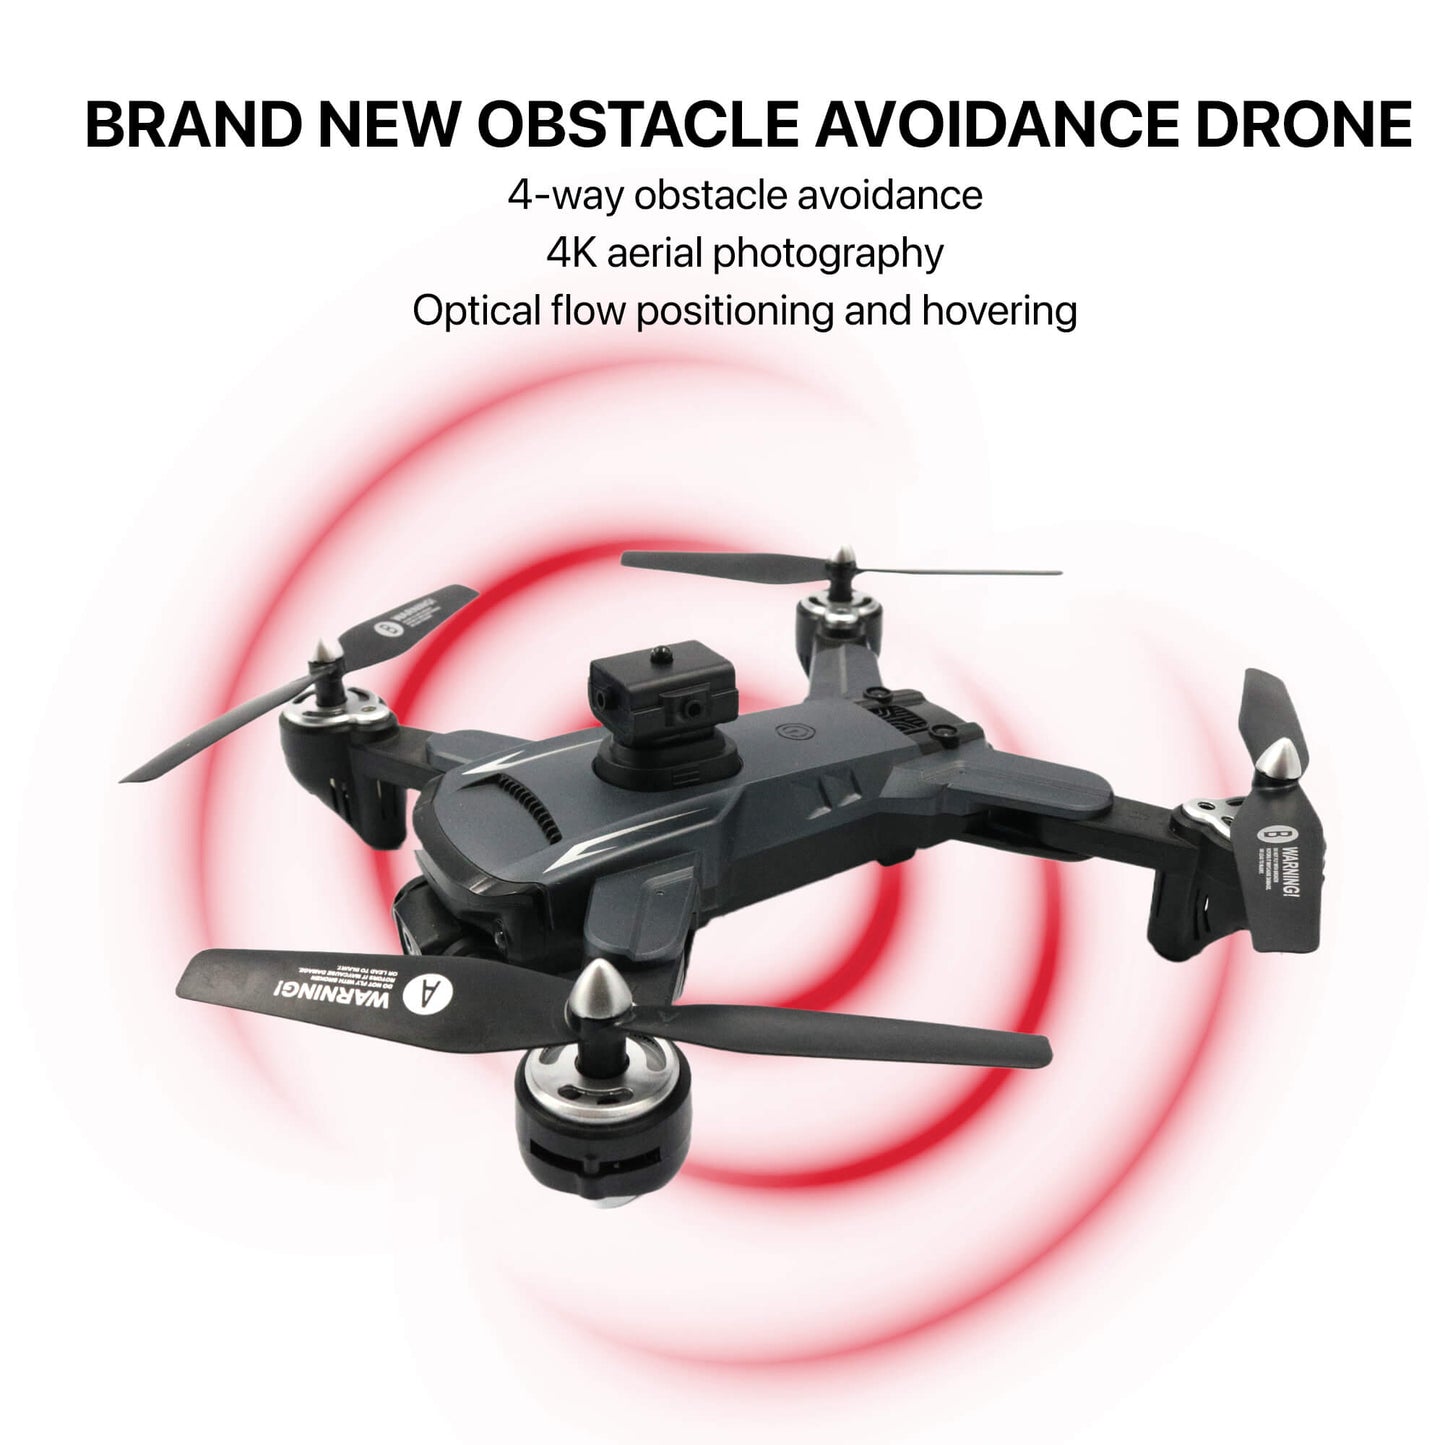 The Bigly Brothers Mark V Extremis BLACK 4k Drone with Camera, 360 Degrees of Obstacle Avoidance, Brushless Motors, 2 Batteries Included, Below 249 Grams, with Carrying Case, NO ASSEMBLY REQUIRED Ready to Fly!